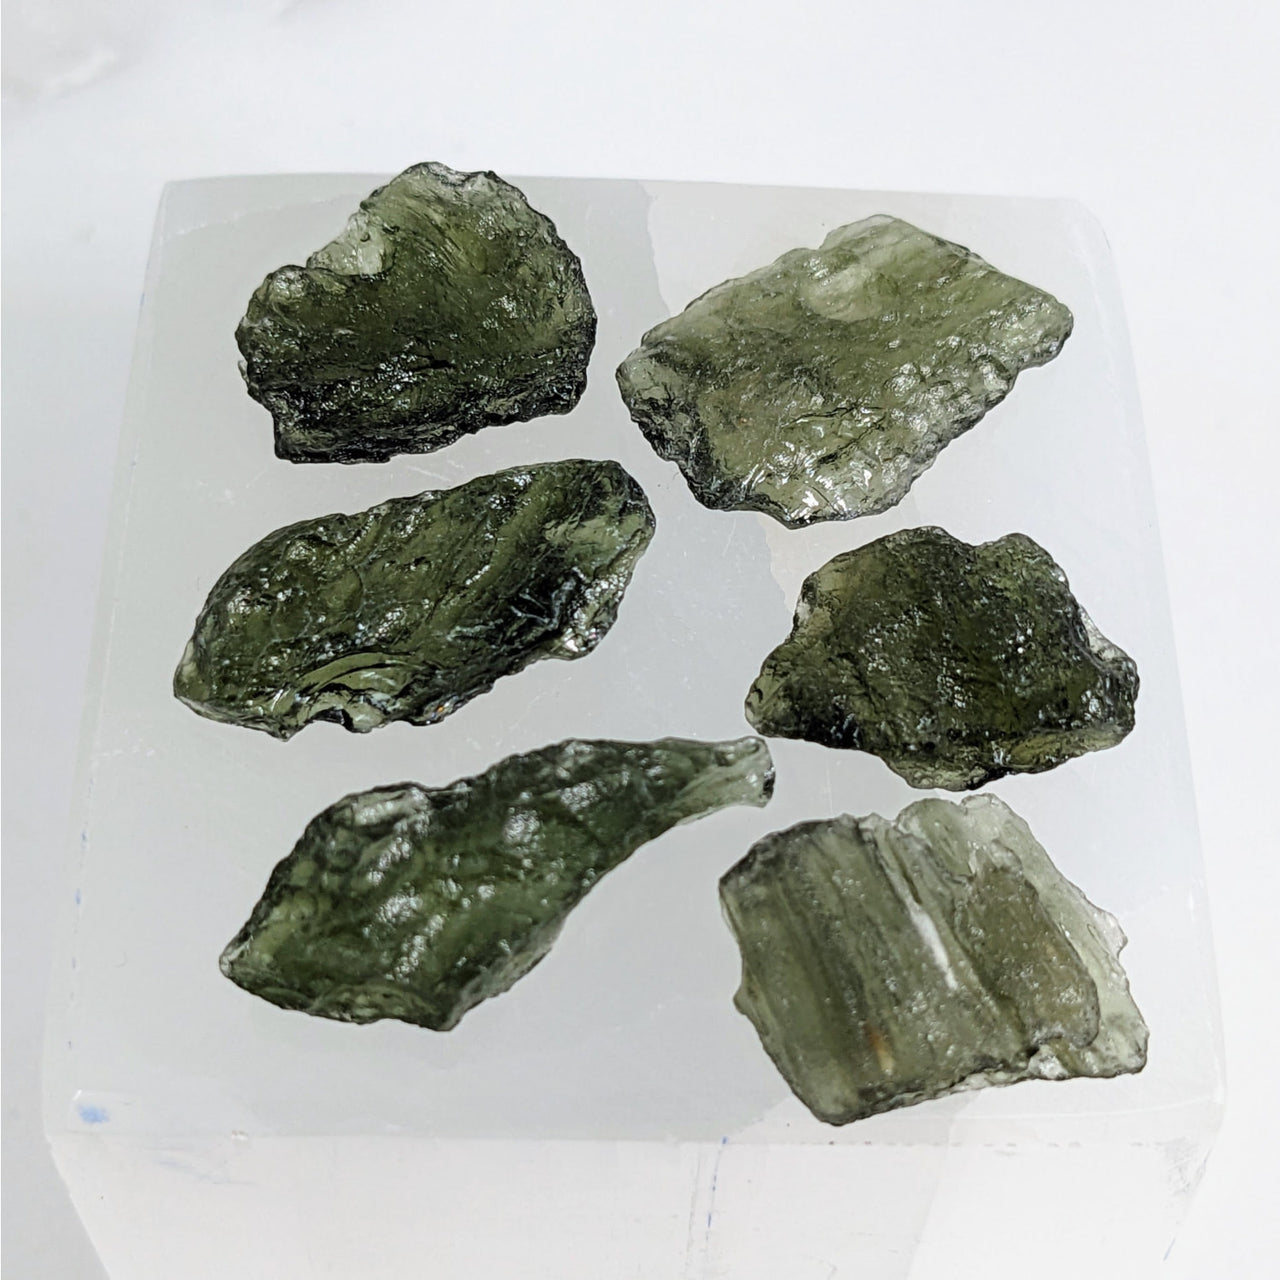 Moldavite Raw Large 1.1-1.3gm Chunk Czech Rep. #LV3469 green crystals on white surface